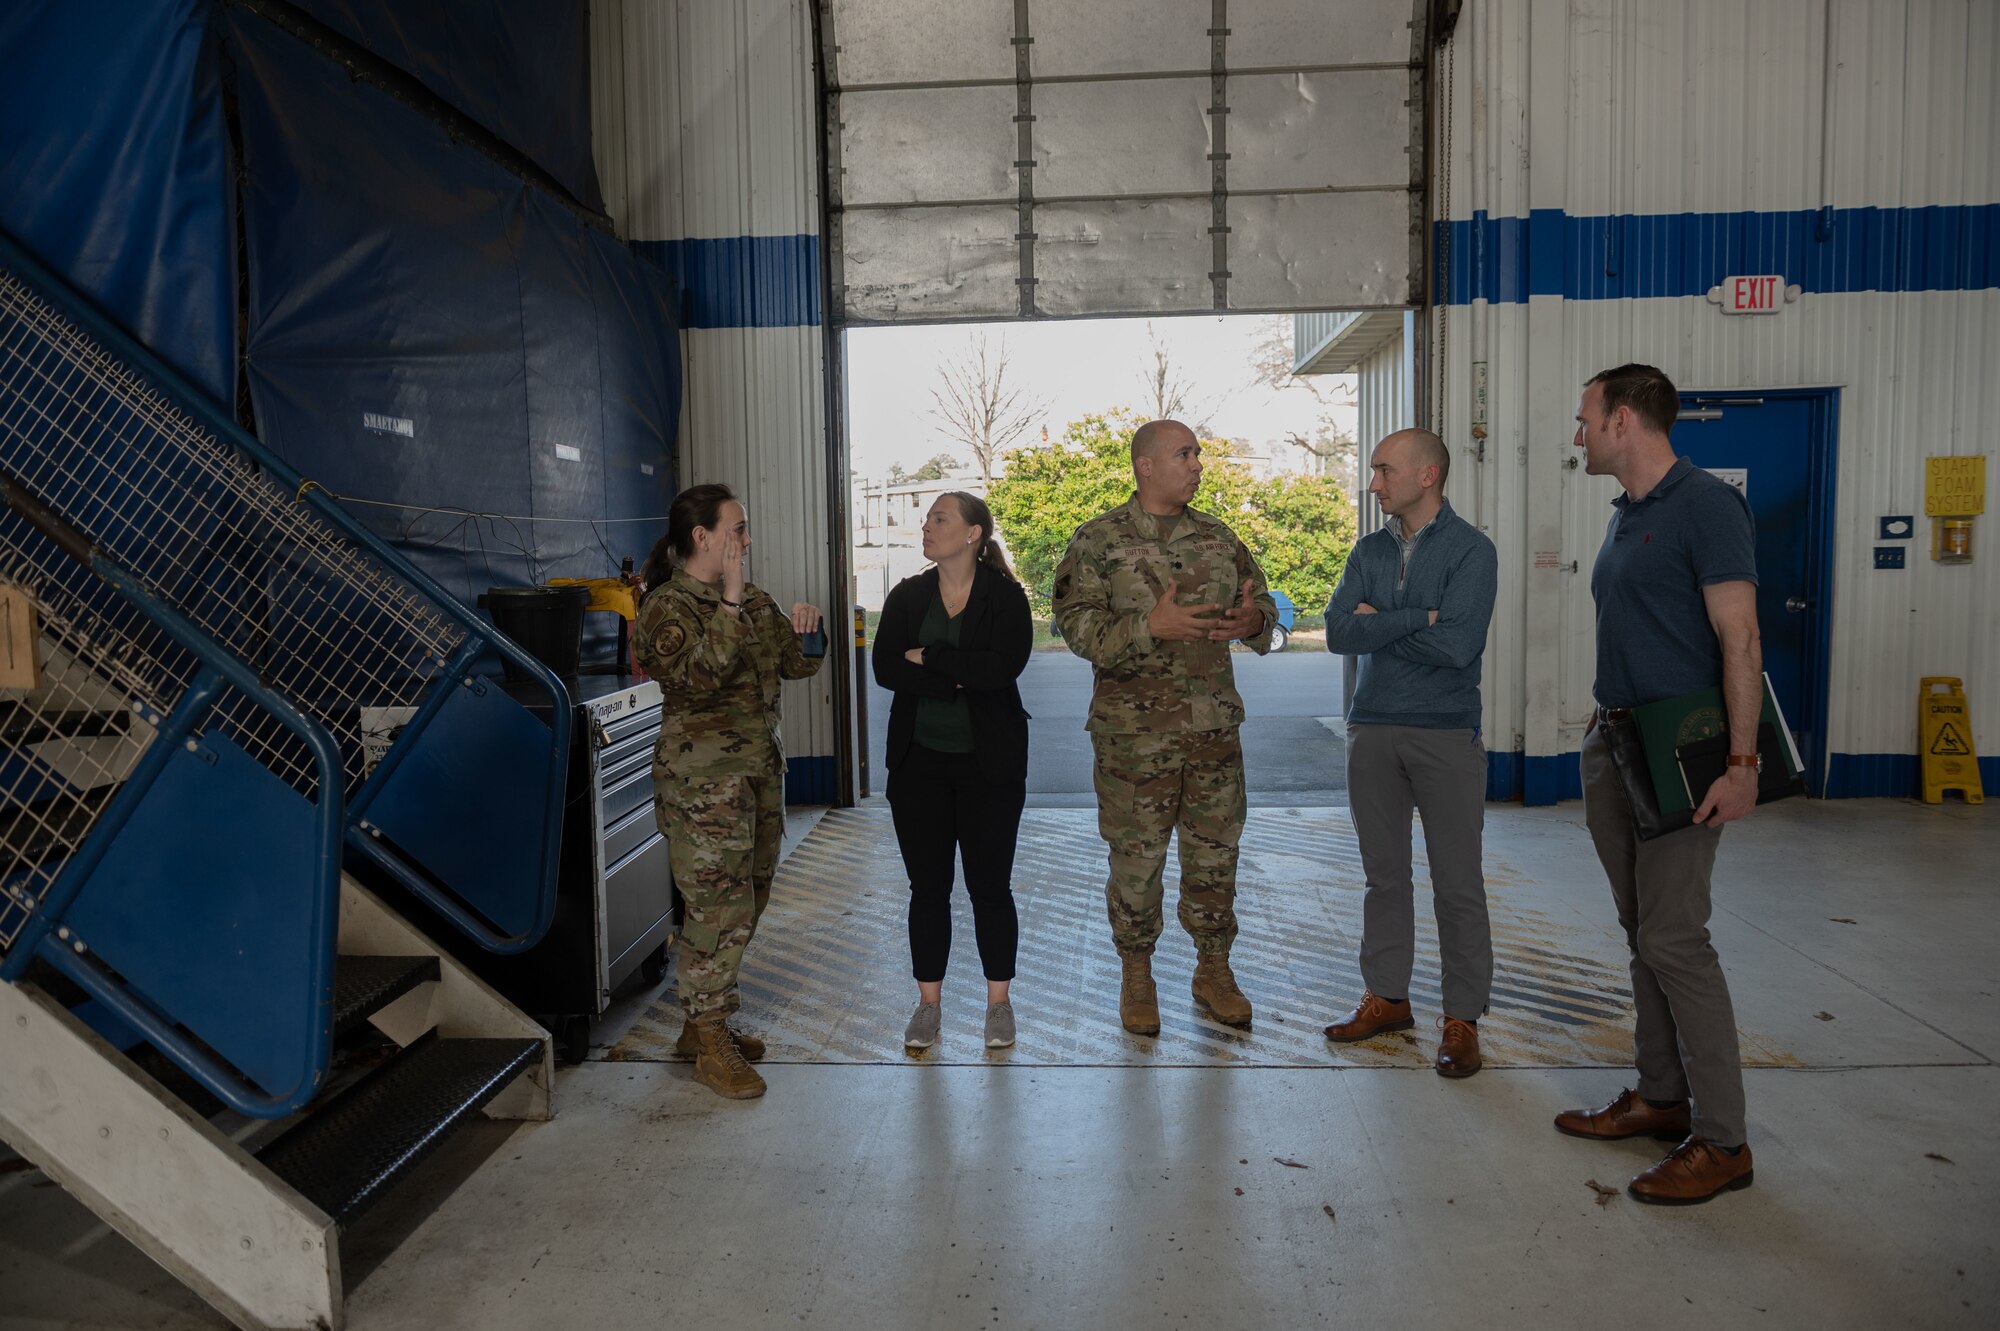 Airmen assigned to the 4th Fighter Wing give a tour of a hangar to staff delegation members during their visit at Seymour Johnson Air Force Base, North Carolina, Feb. 22, 2023. STAFFDEL members visited the base to discuss aircrew production. (U.S. Air Force photo by Airman 1st Class Rebecca Sirimarco-Lang)